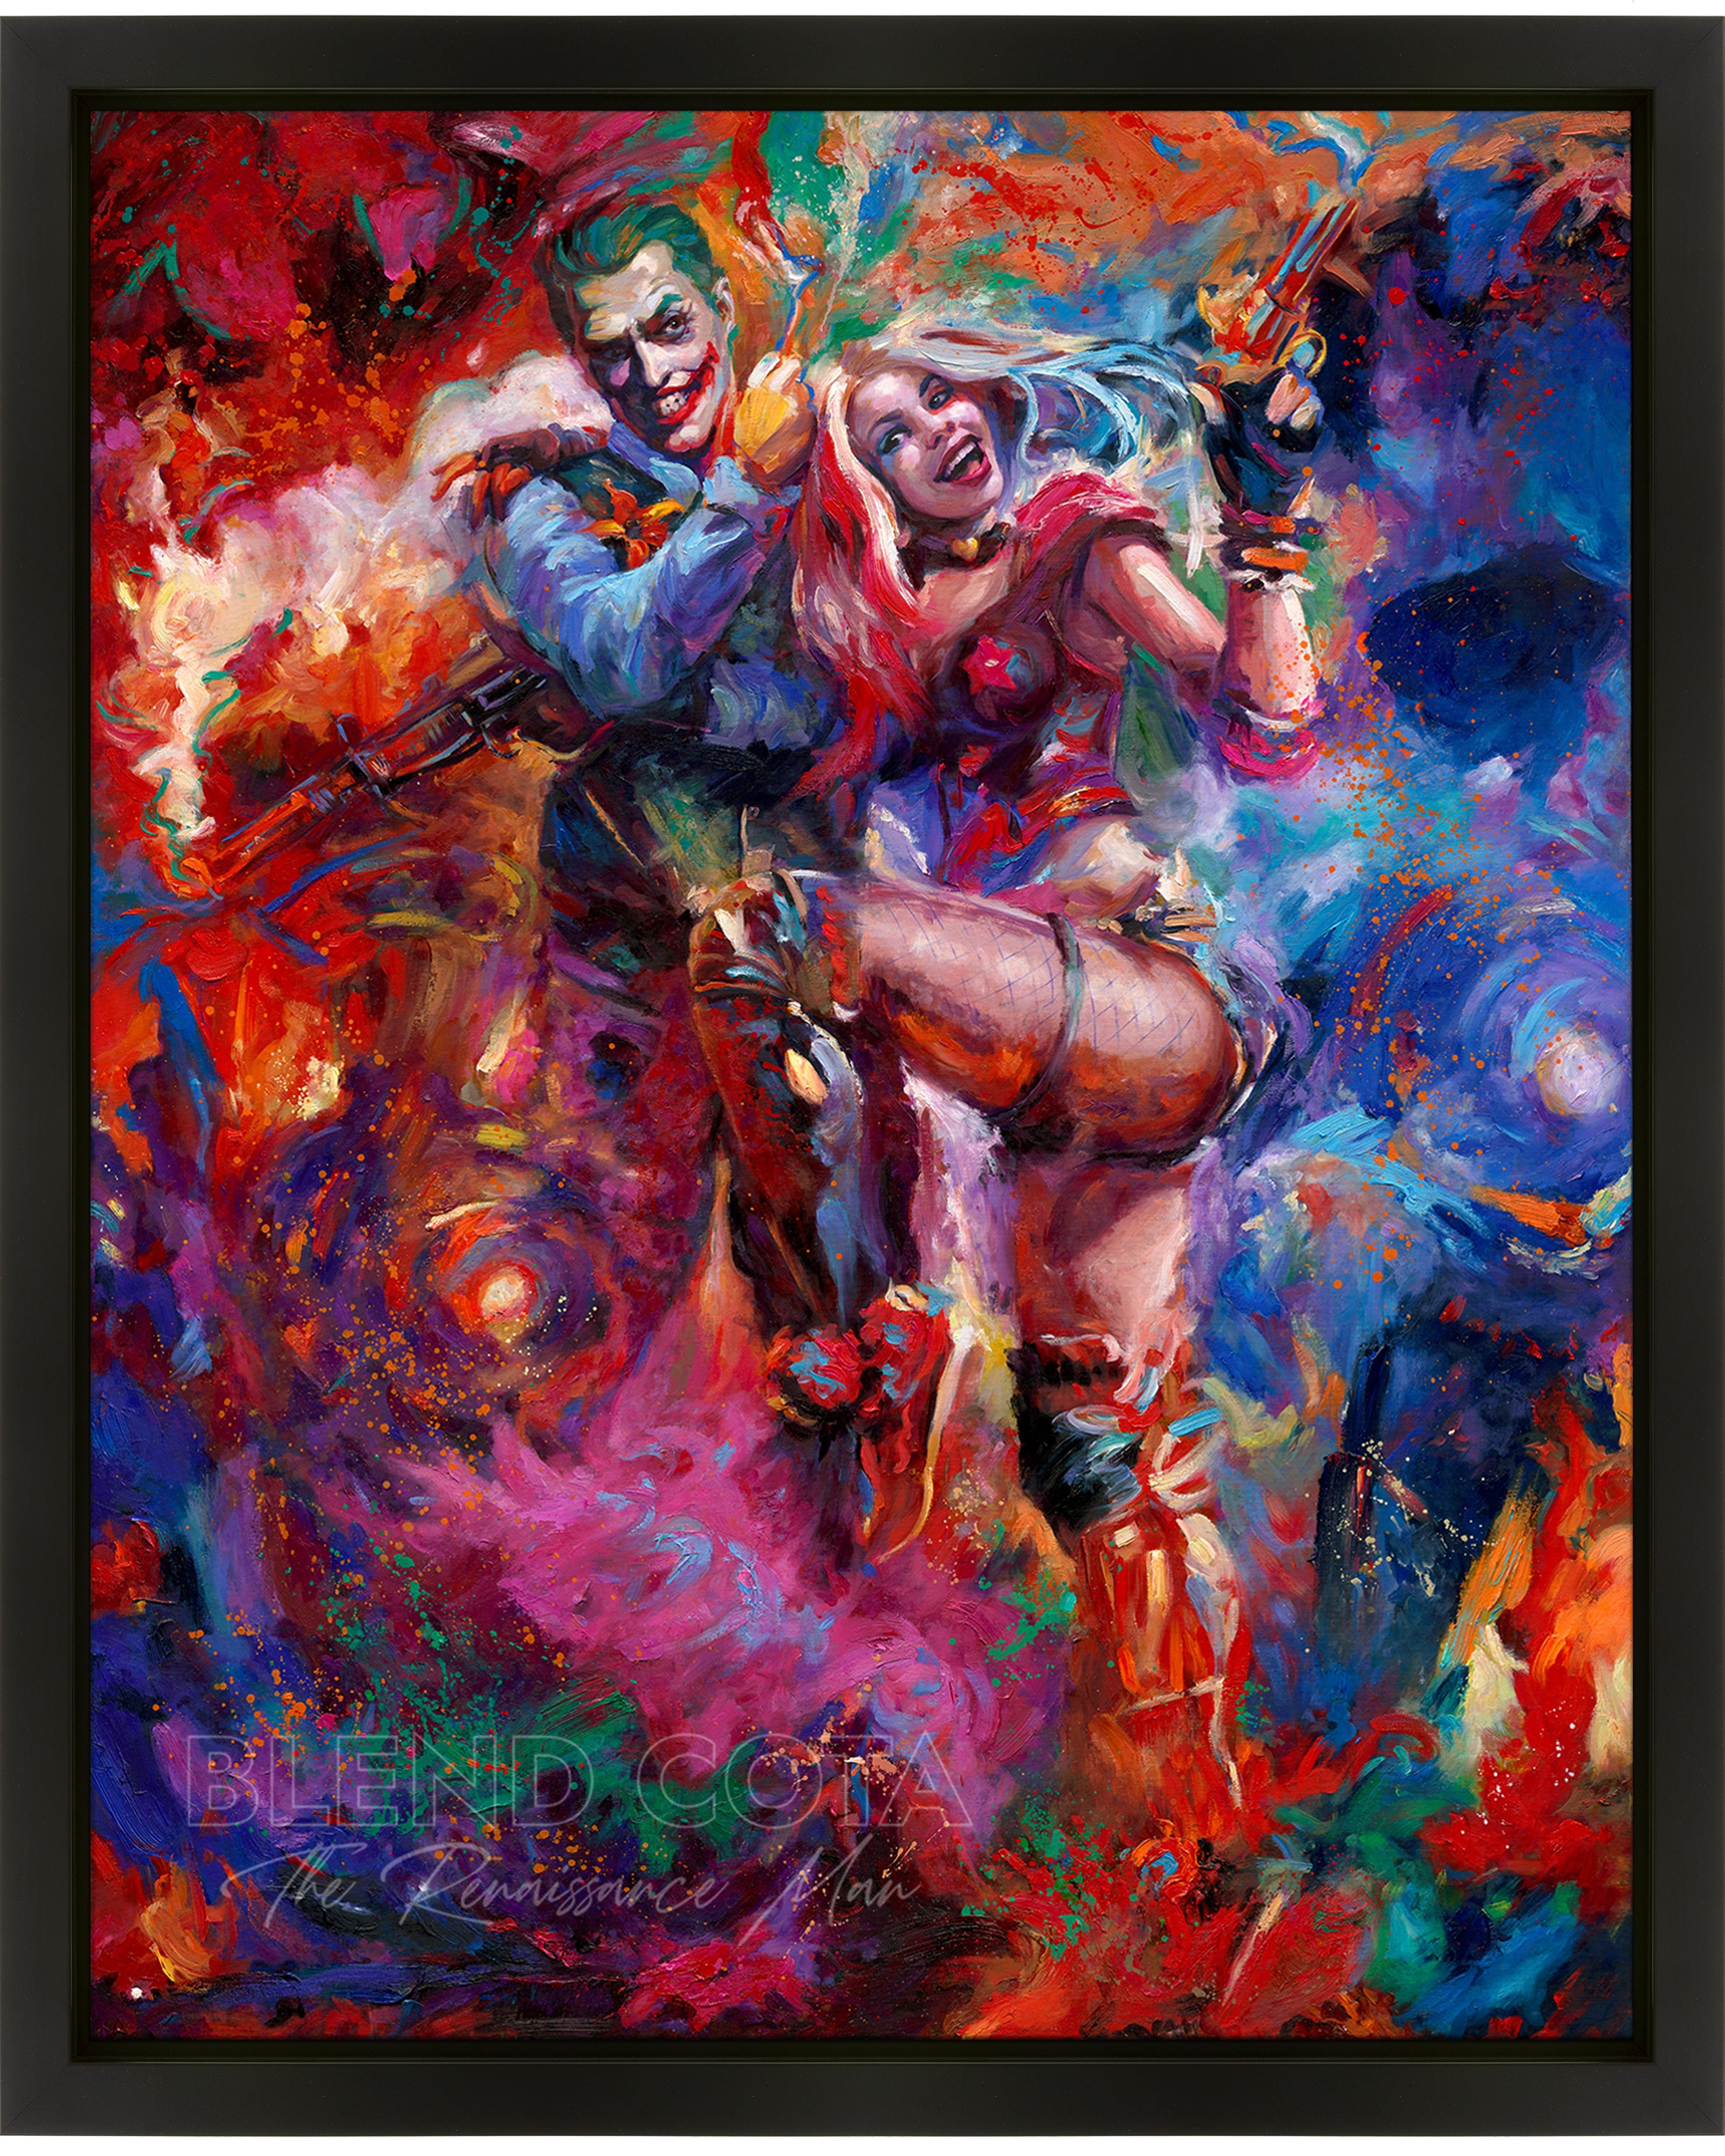 Oil on canvas original painting of the Joker and Harley Quinn, DC Comics, surrounded by fog and police lights, with the symbol of batman in the sky, they are standing and laughing maniacally in red and blue and pink colorful brushstrokes, color expressionism style.